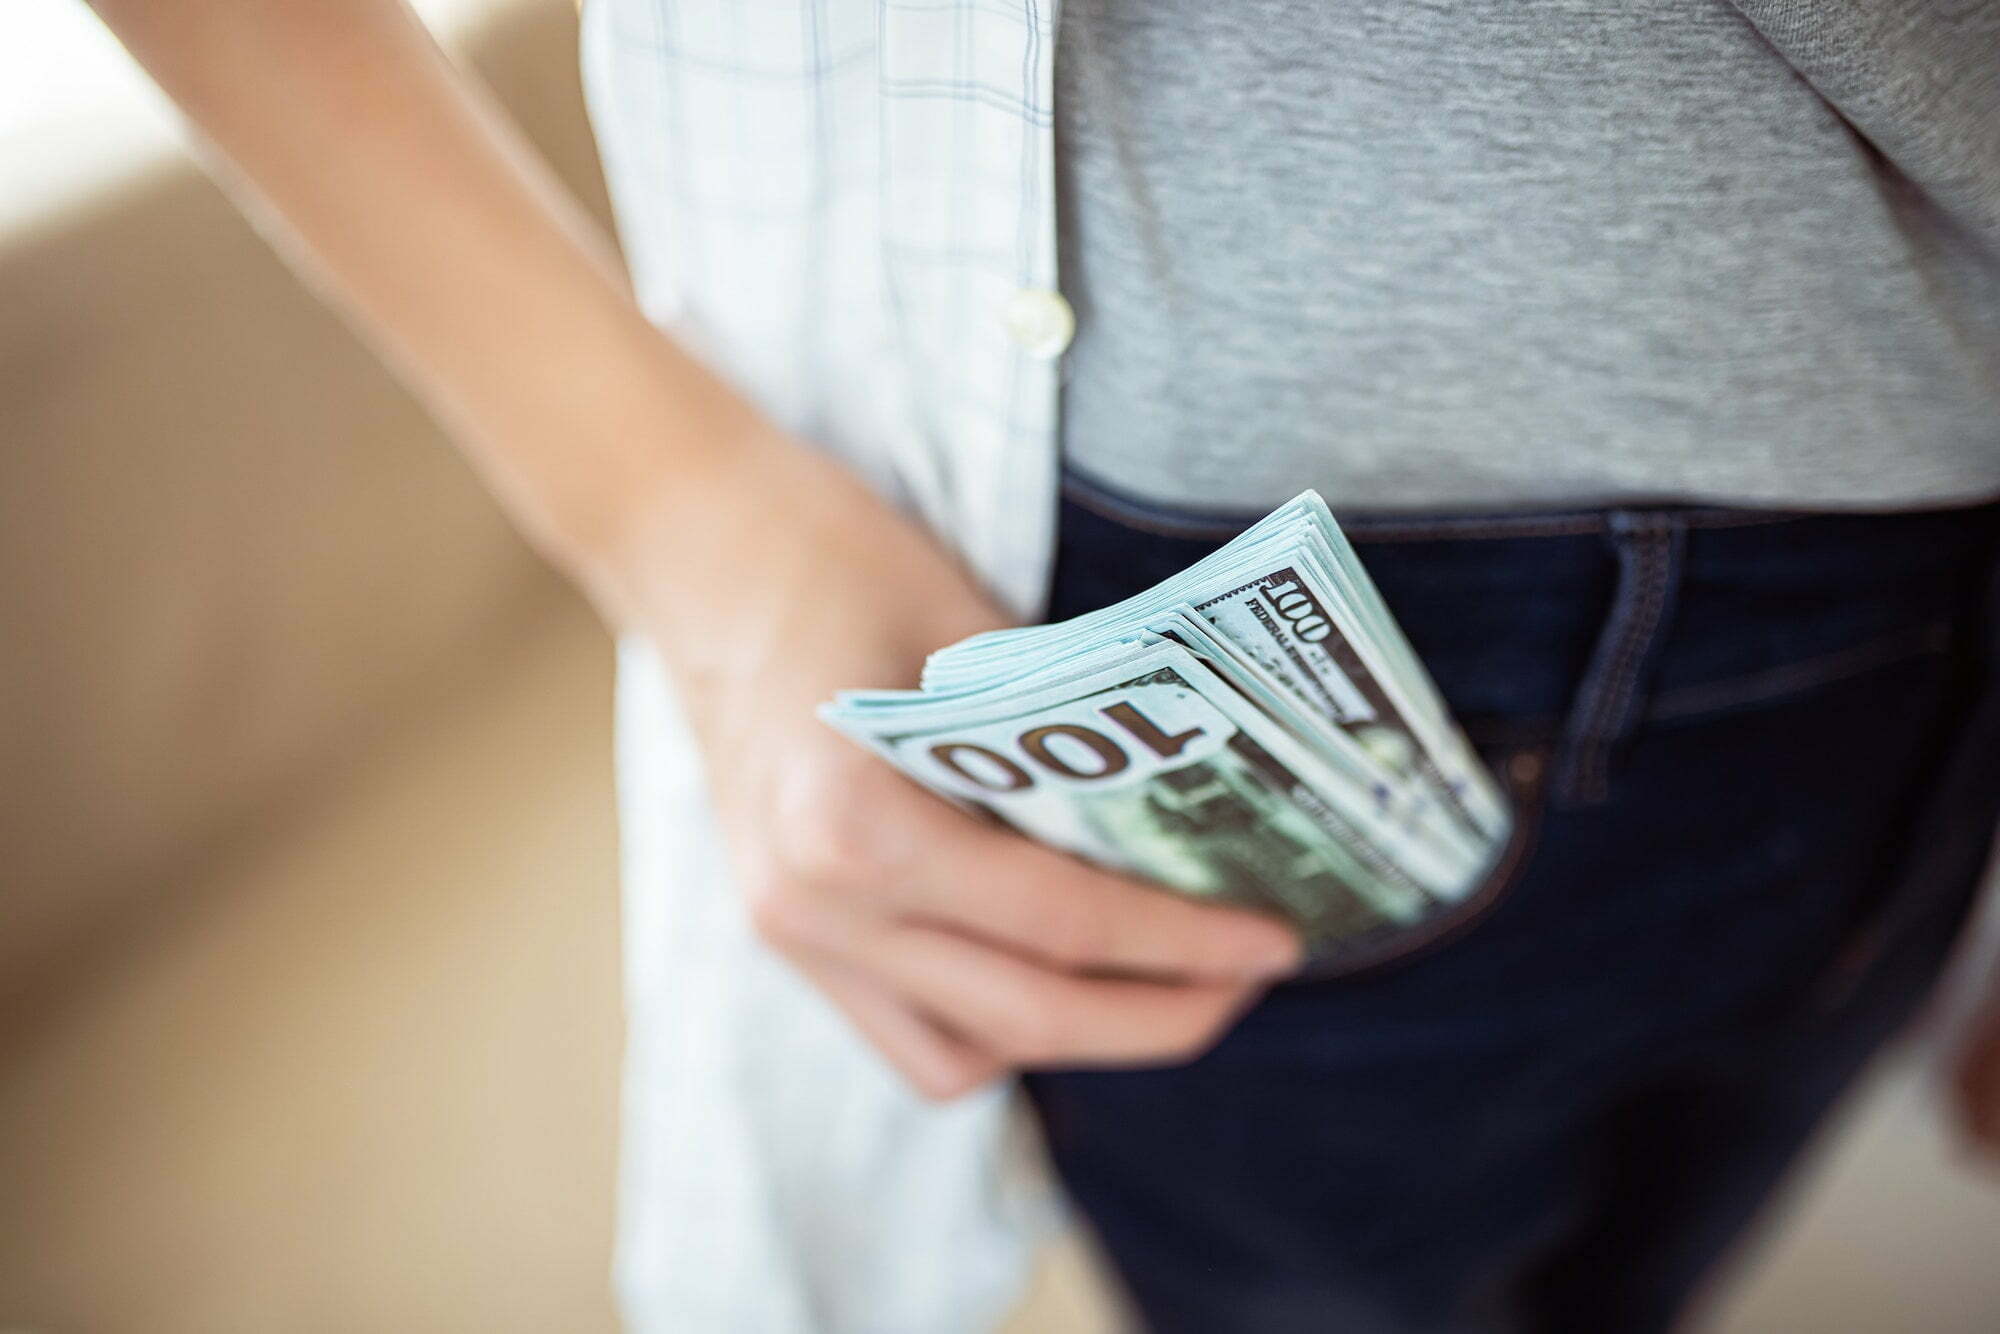 The teenager puts a bundle of dollars in his pocket. Cash salary